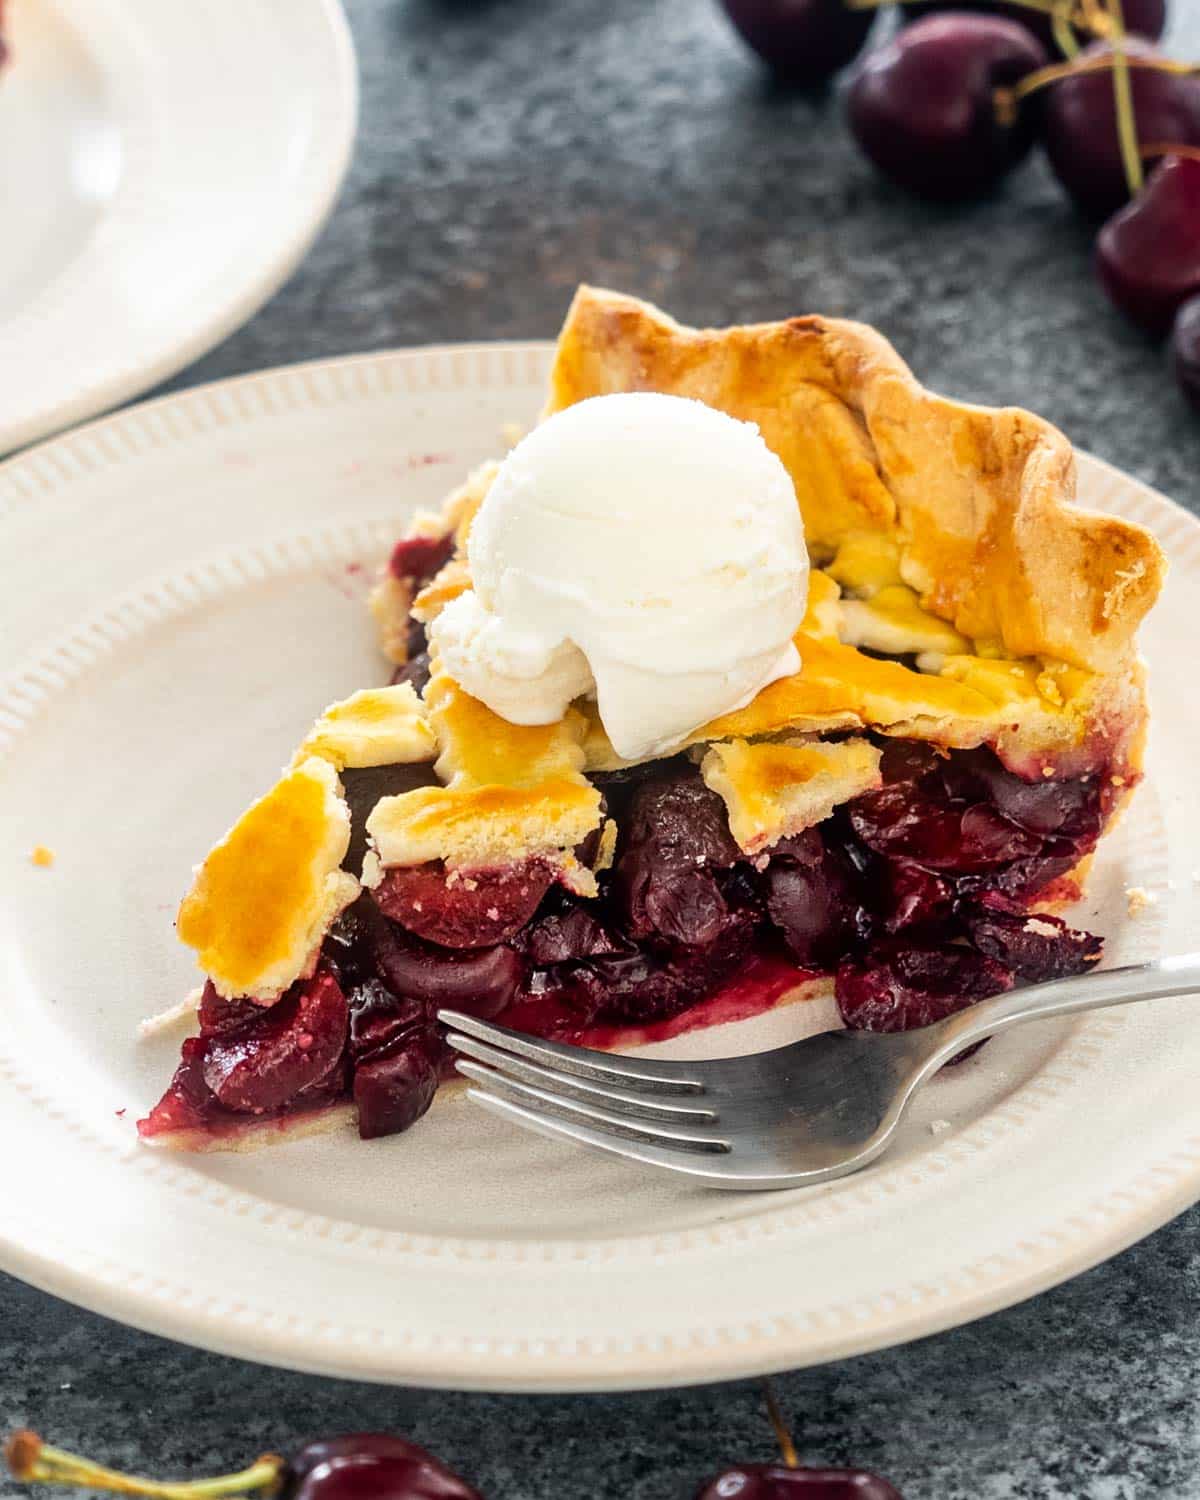 a slice of cherry pie on a plate with a scoop of ice cream.